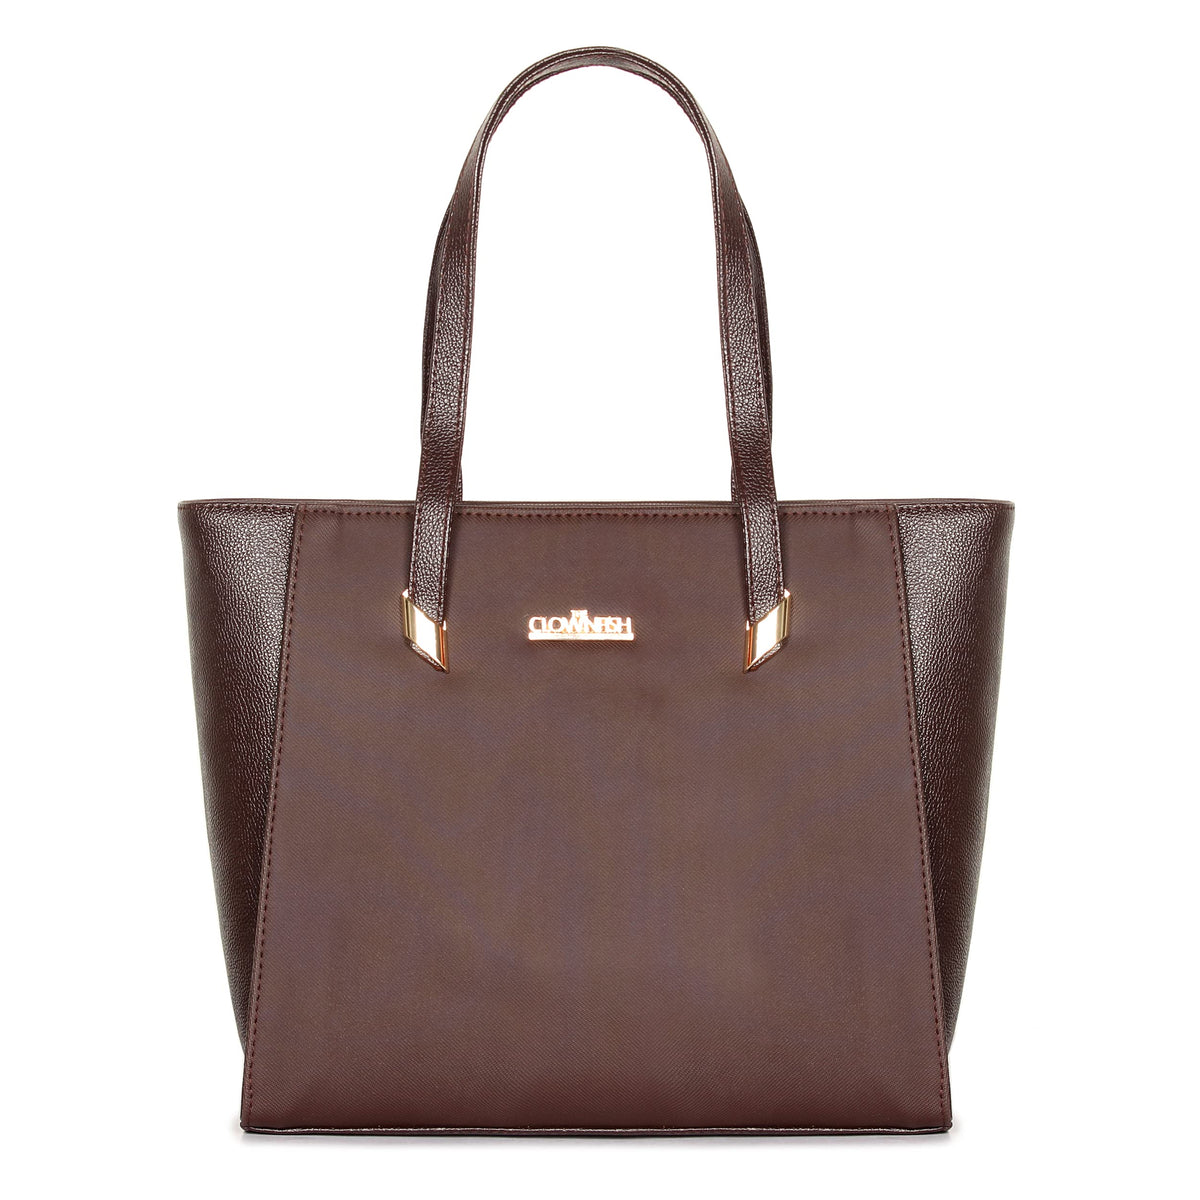 The Clownfish Hershey Faux Leather Handbag for Women (Chocolate Brown)